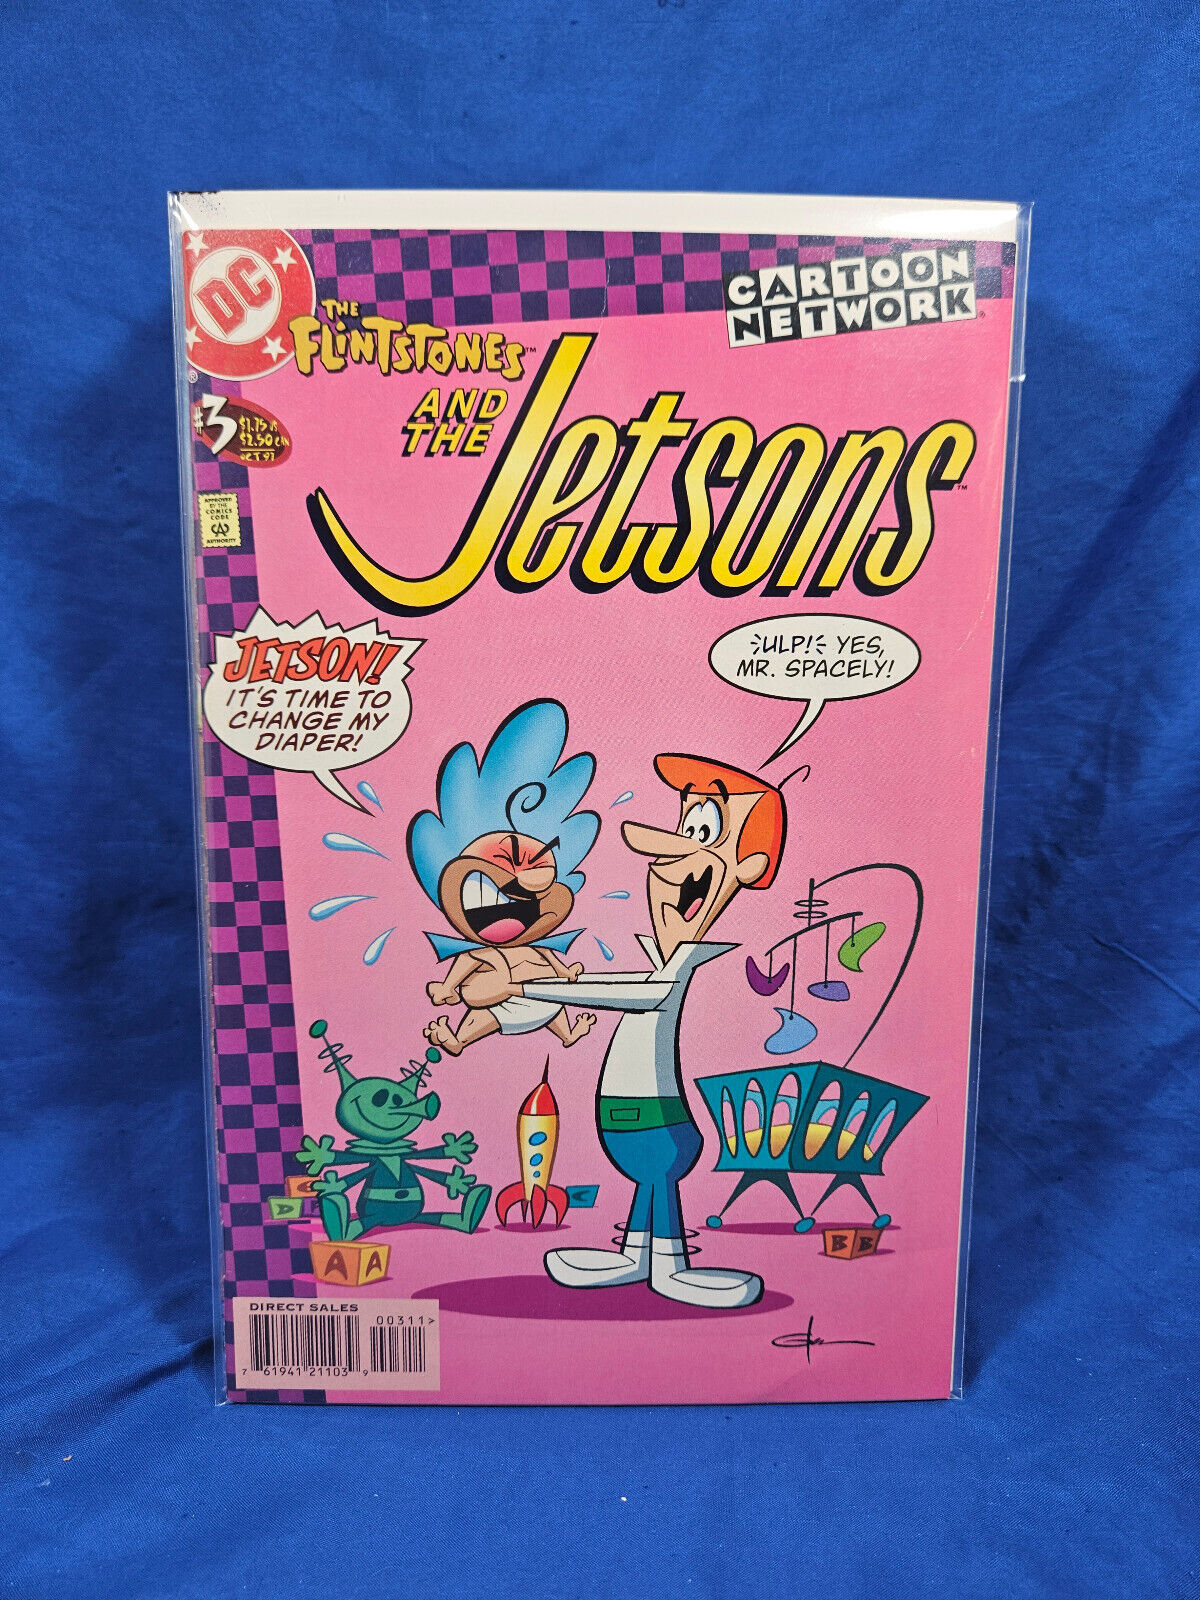 1 THE FLINTSTONES AND THE JETSONS #3 DC 1997 Cartoon Network FN/VF 7.0